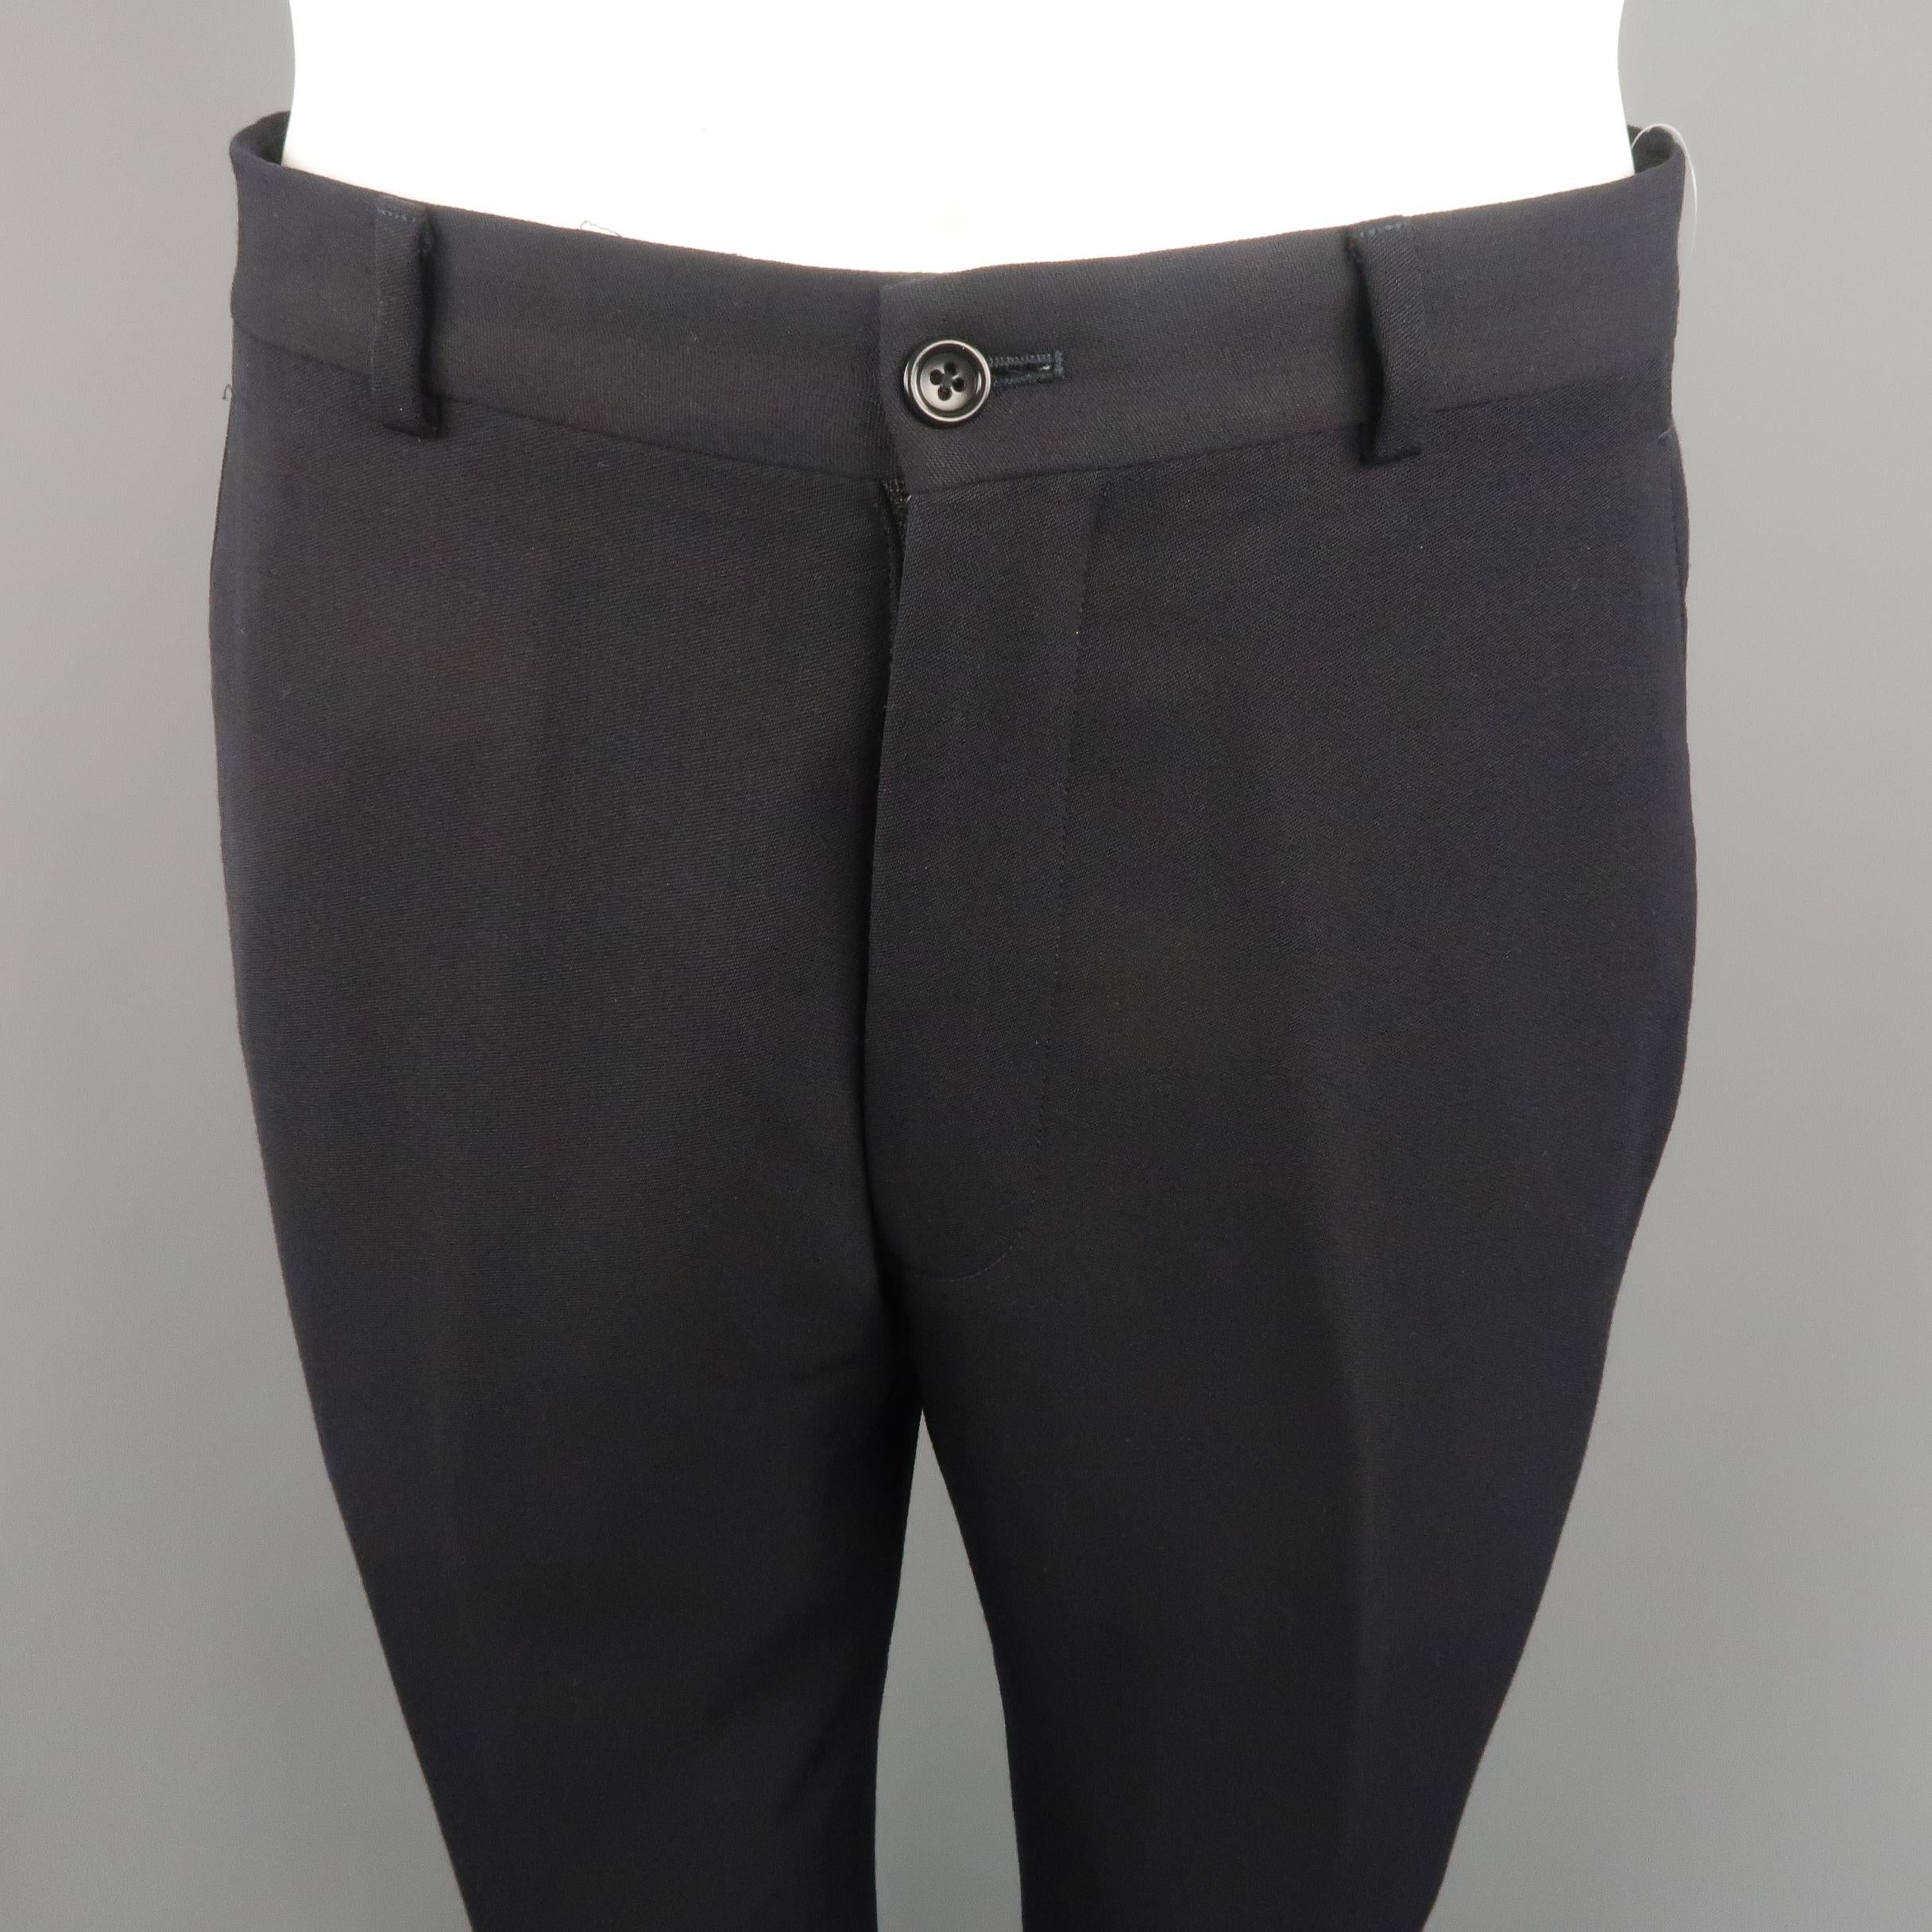 ARMANI COLLEZIONI dress pants come in black solid tone, wool material with slant side pockets and zip fly. Made in Italy.
 
Excellent Pre-Owned Condition.
Marked: 32 / R   US
 
Measurements:
 
Waist: 32 in.
Rise: 11.5 in.
Inseam: 27 in.